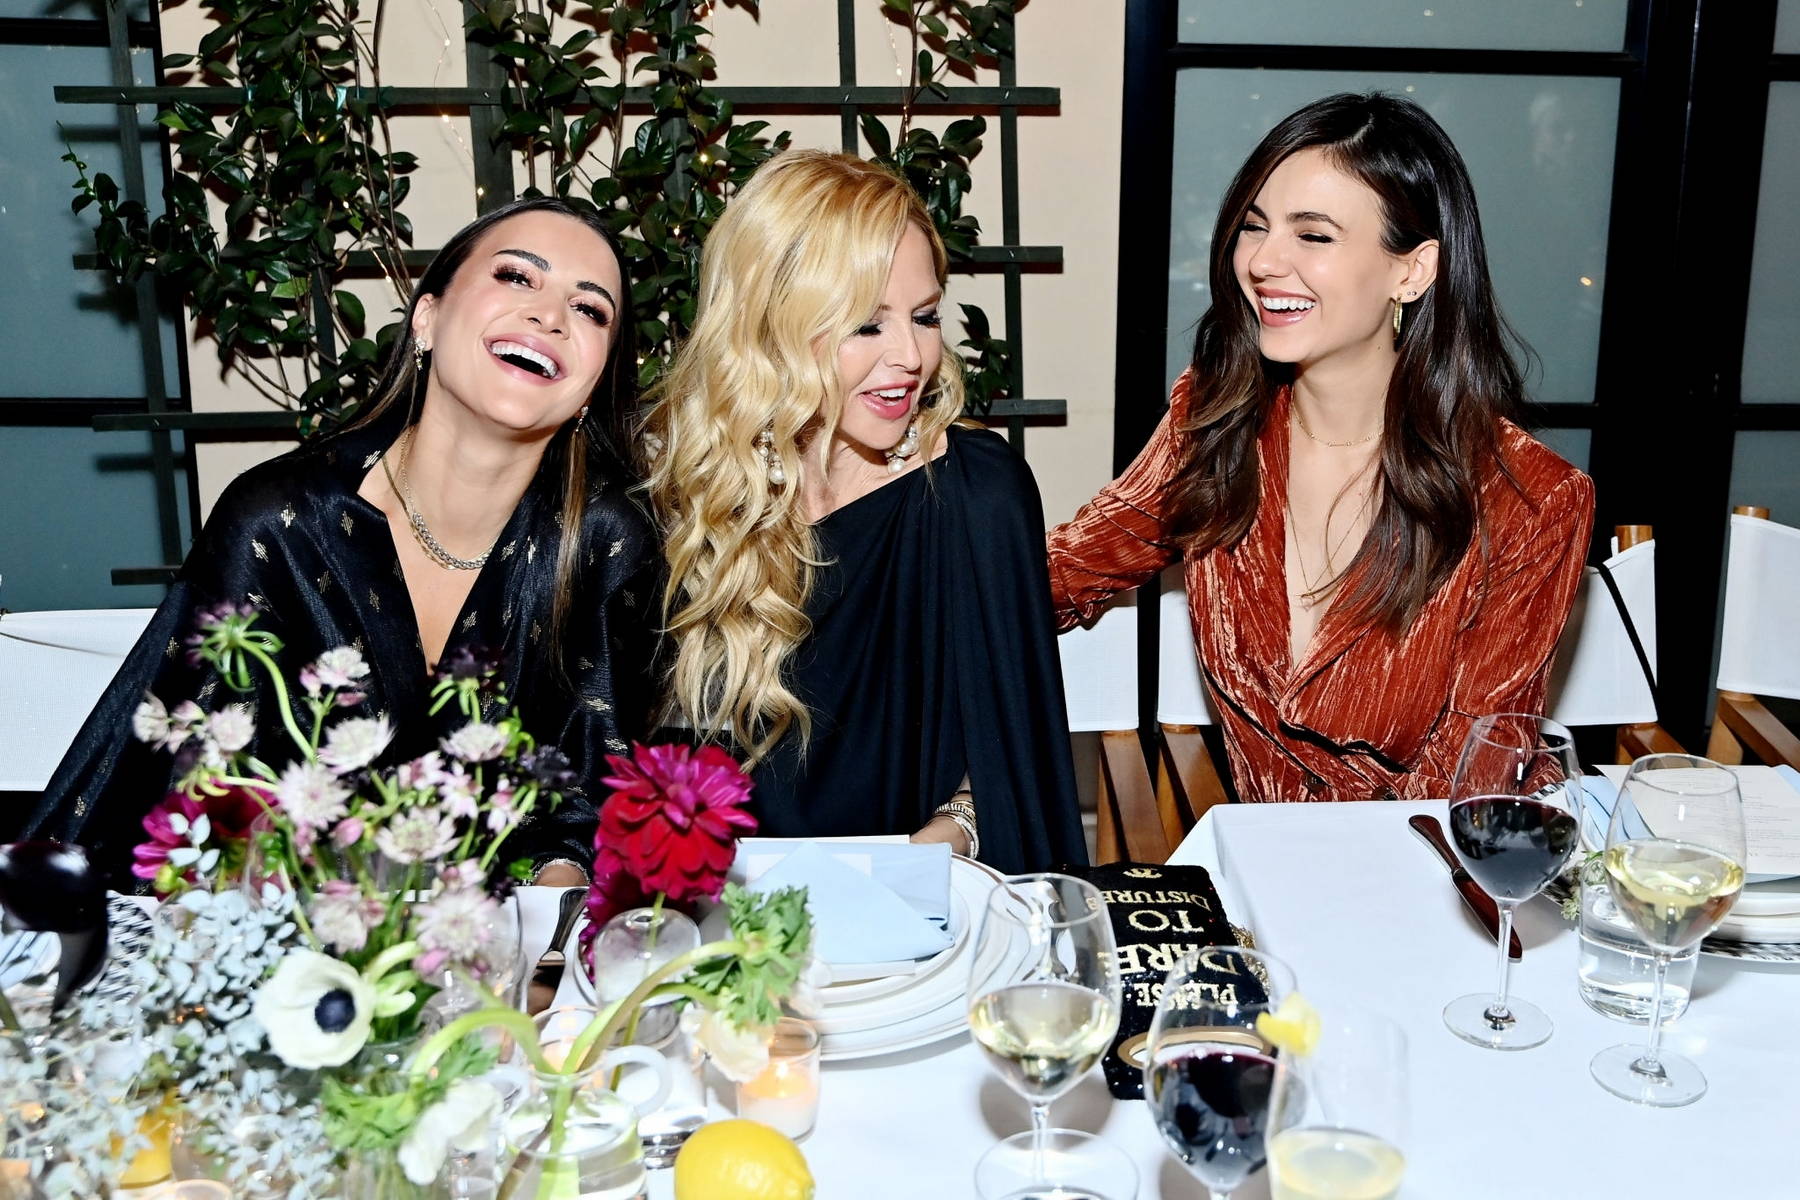 Victoria Justice attends the Rachel Zoe Curateur event in Beverly